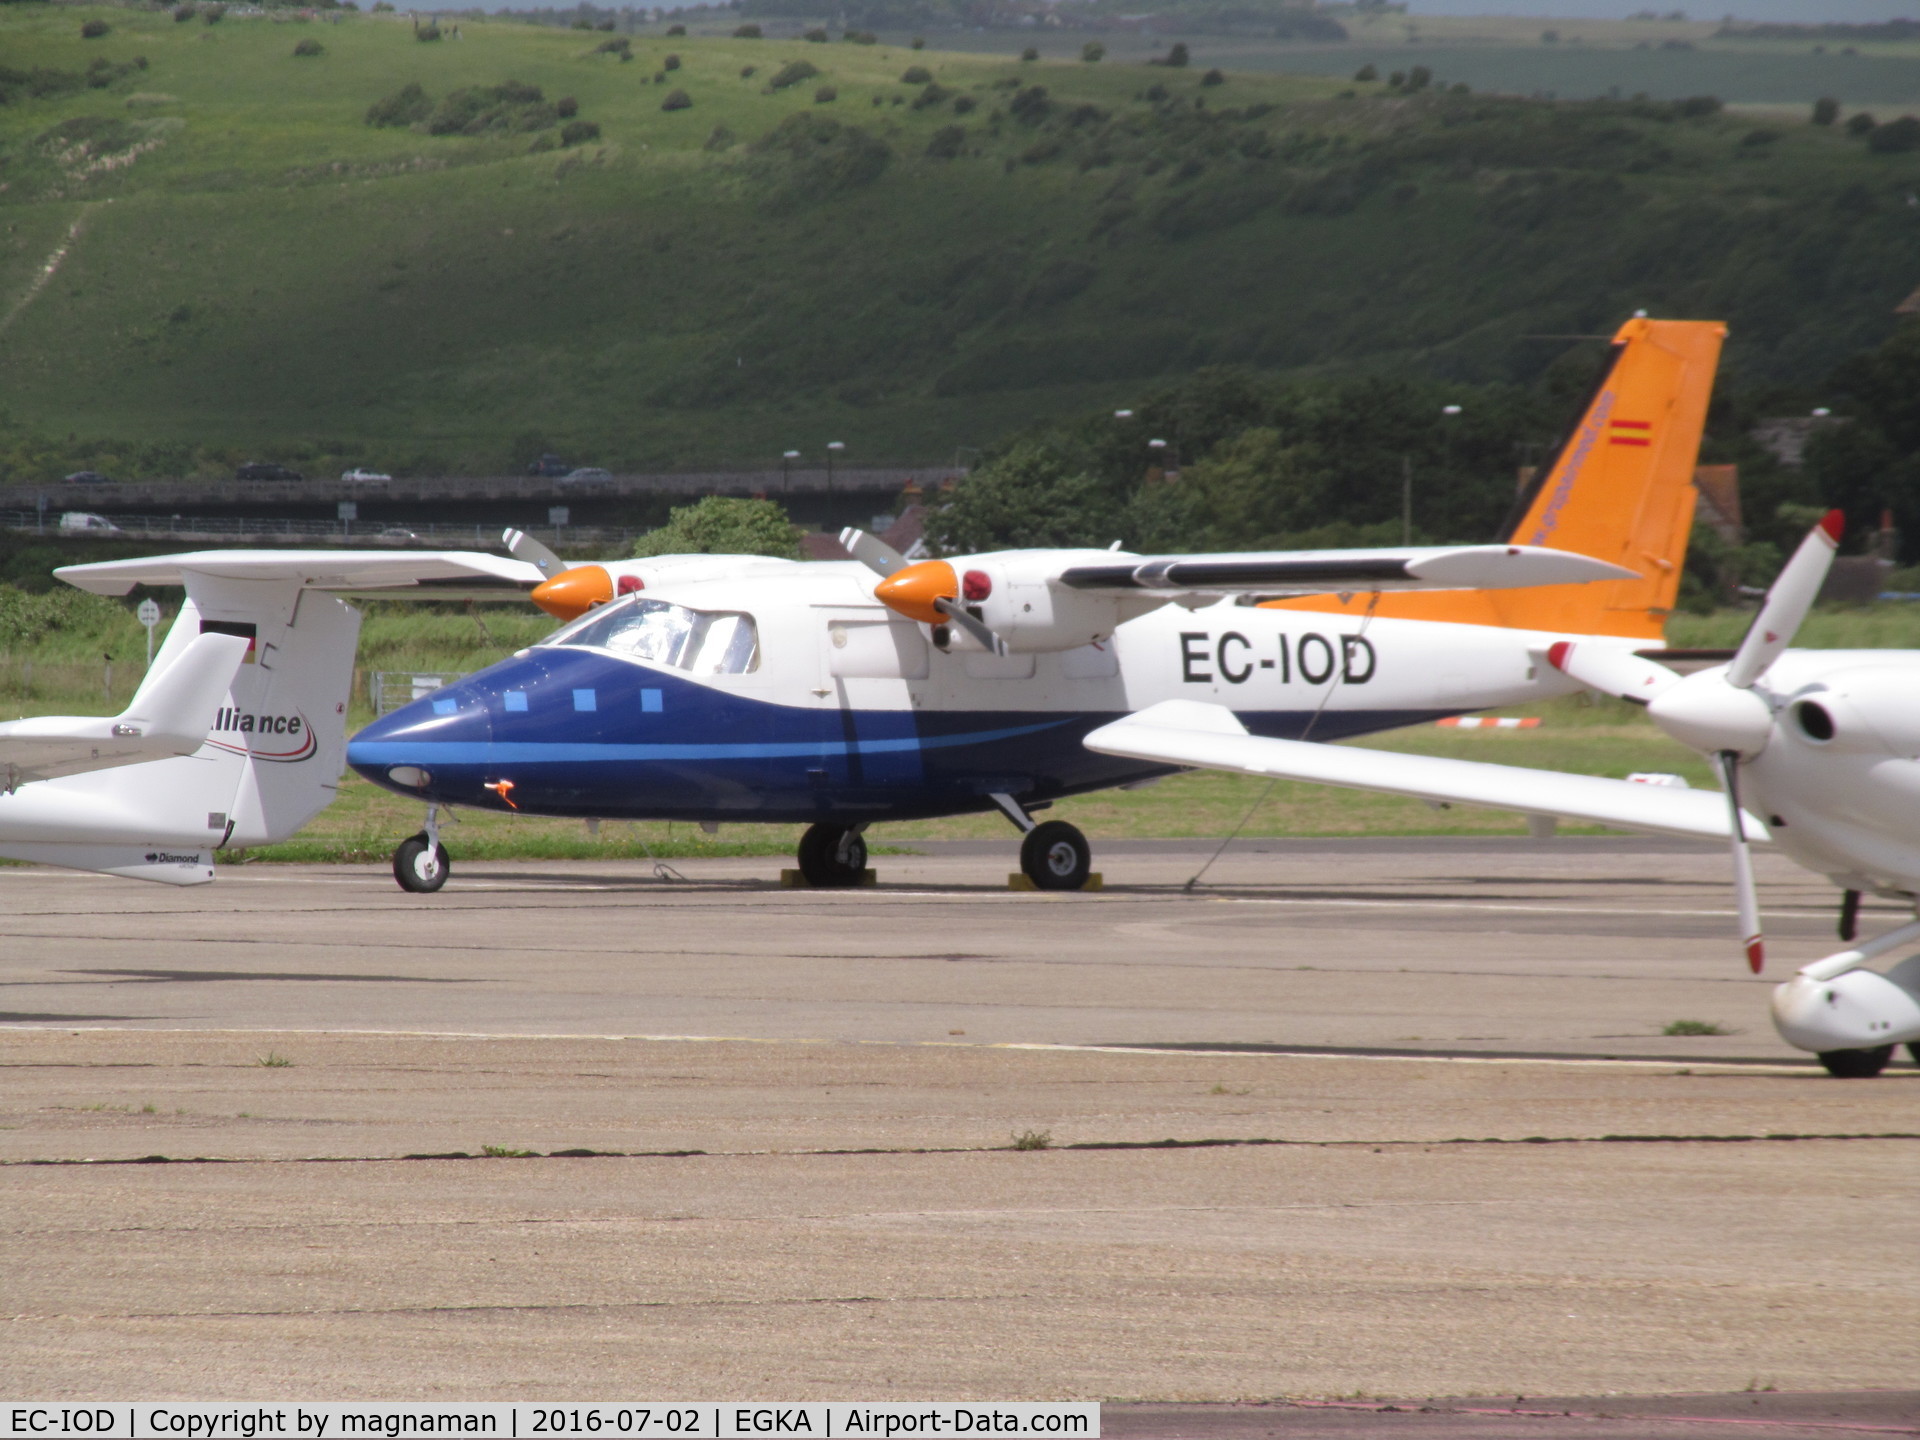 EC-IOD, 1980 Partenavia P-68C C/N 229, on crowded shoreham apron - her on mapping contract I think